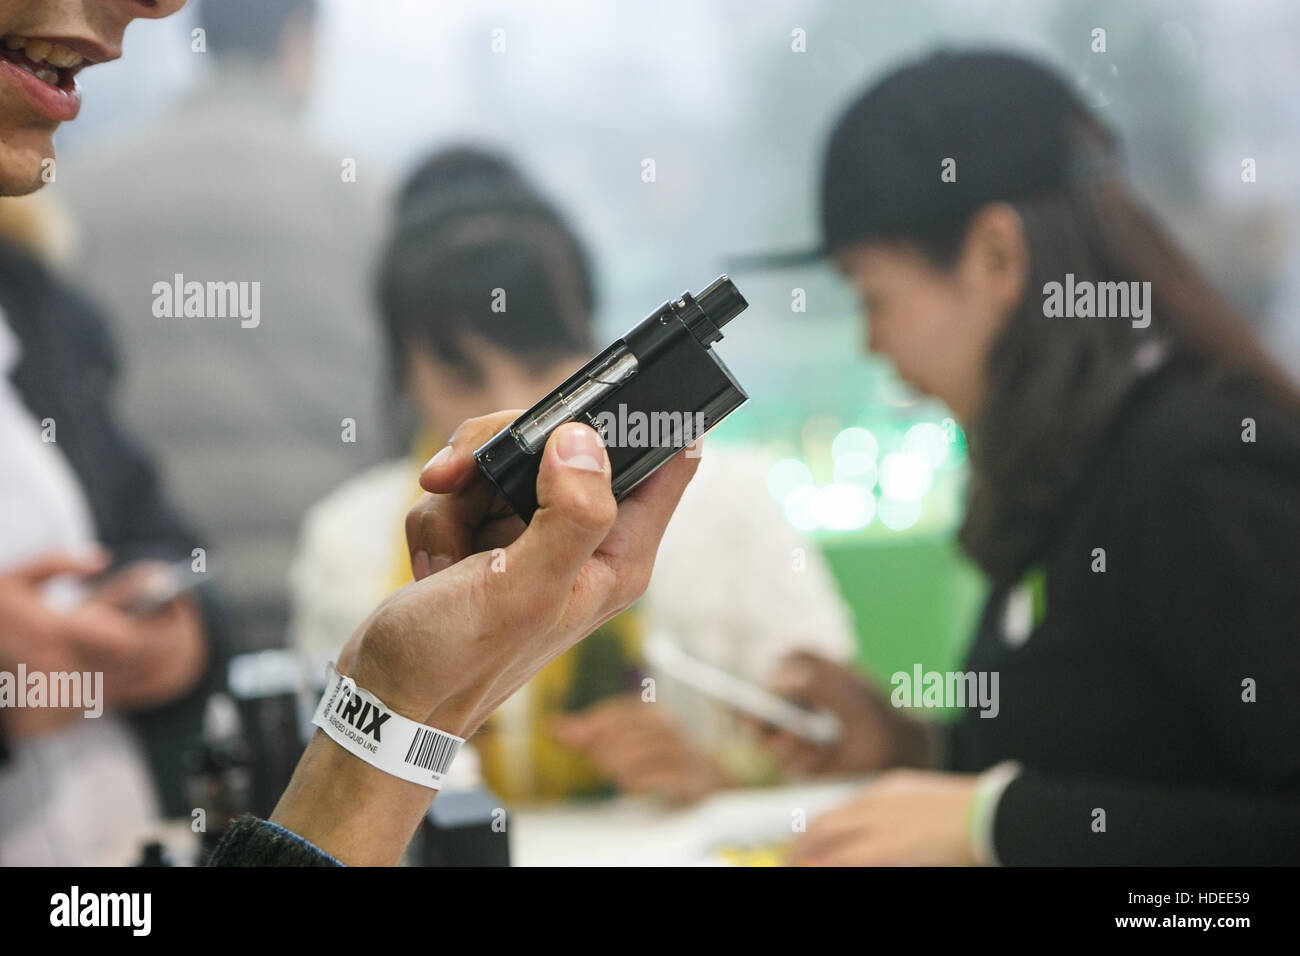 MOSCOW - 9 DECEMBER,2016: International Vape Expo.Man try new vaper ejuice liquid and vapind device gadget Stock Photo